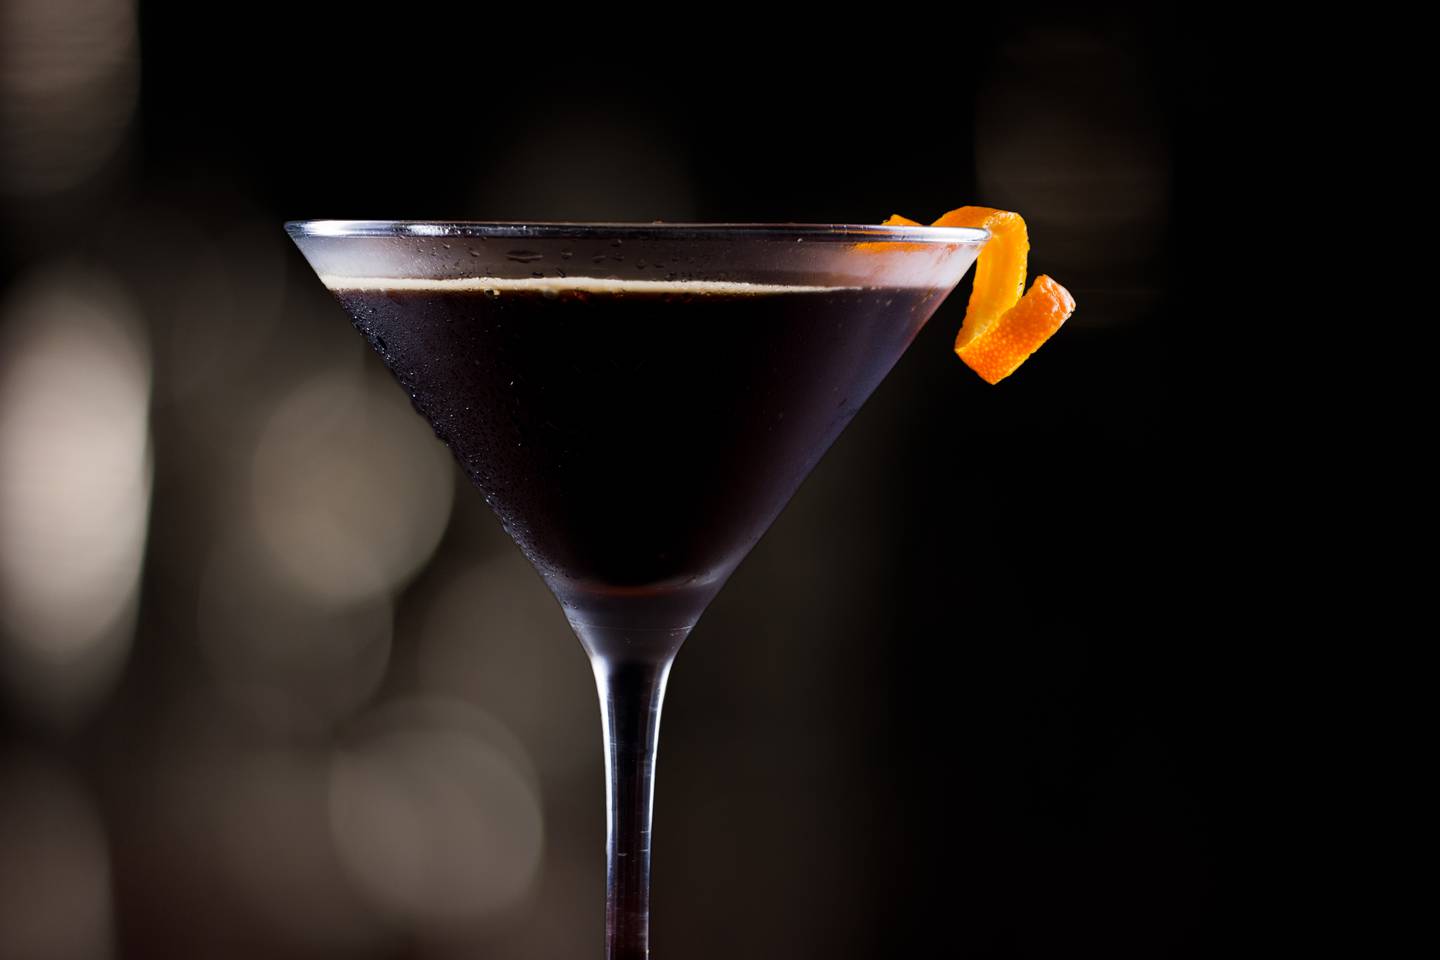 The Raventini will be one of four cocktails served at a pop-up Edgar Allan Poe experience. It's made with citrus vodka, blackberry liquor, lime juice, and secret spices.